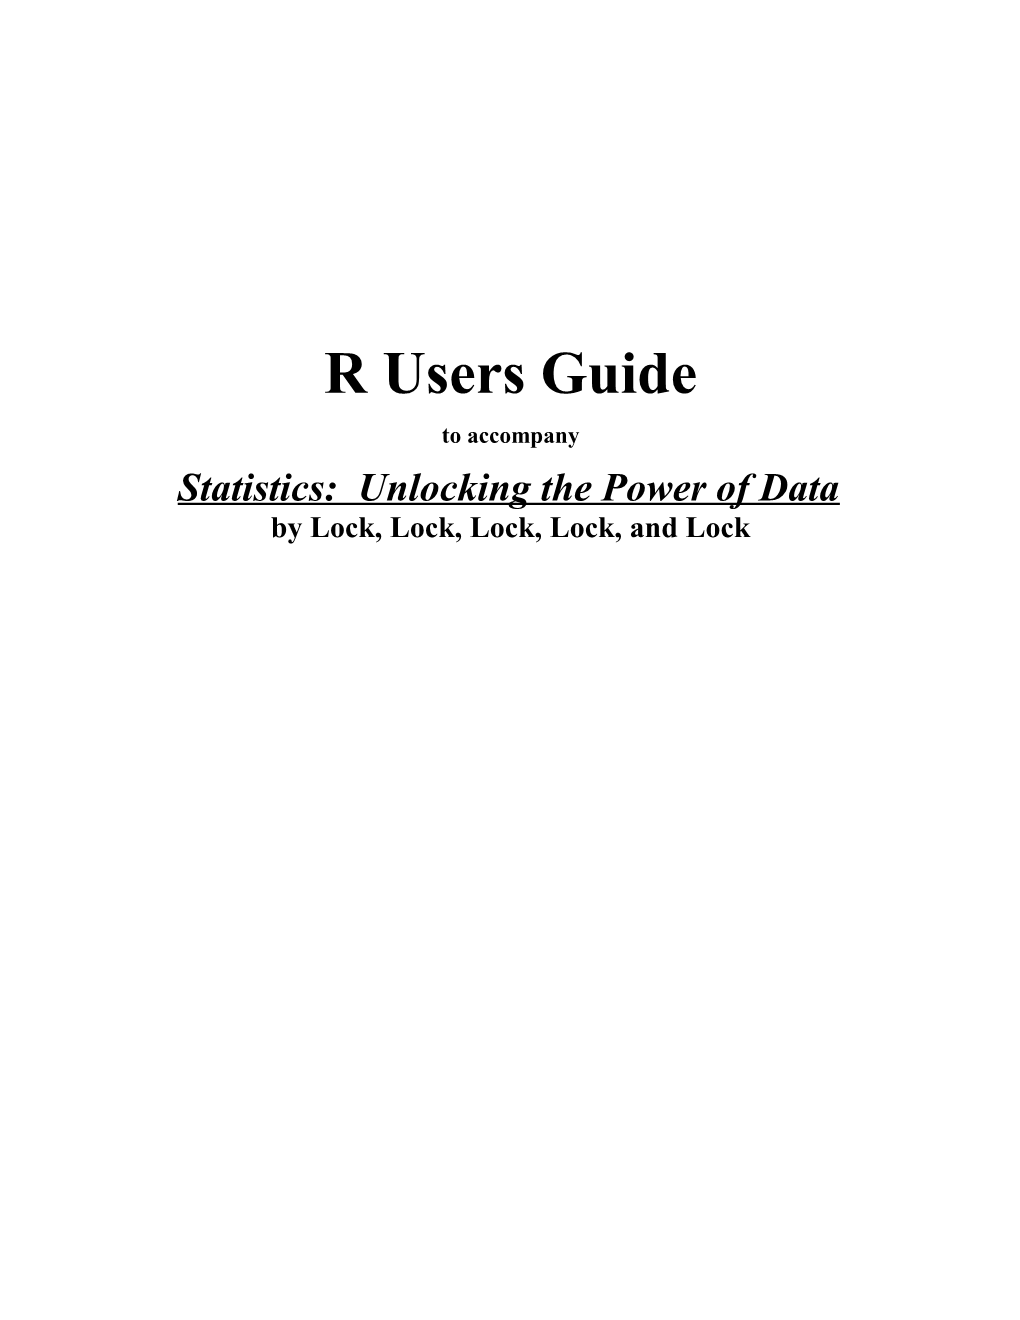 R Users Guide - 1Statistics: Unlocking the Power of Data